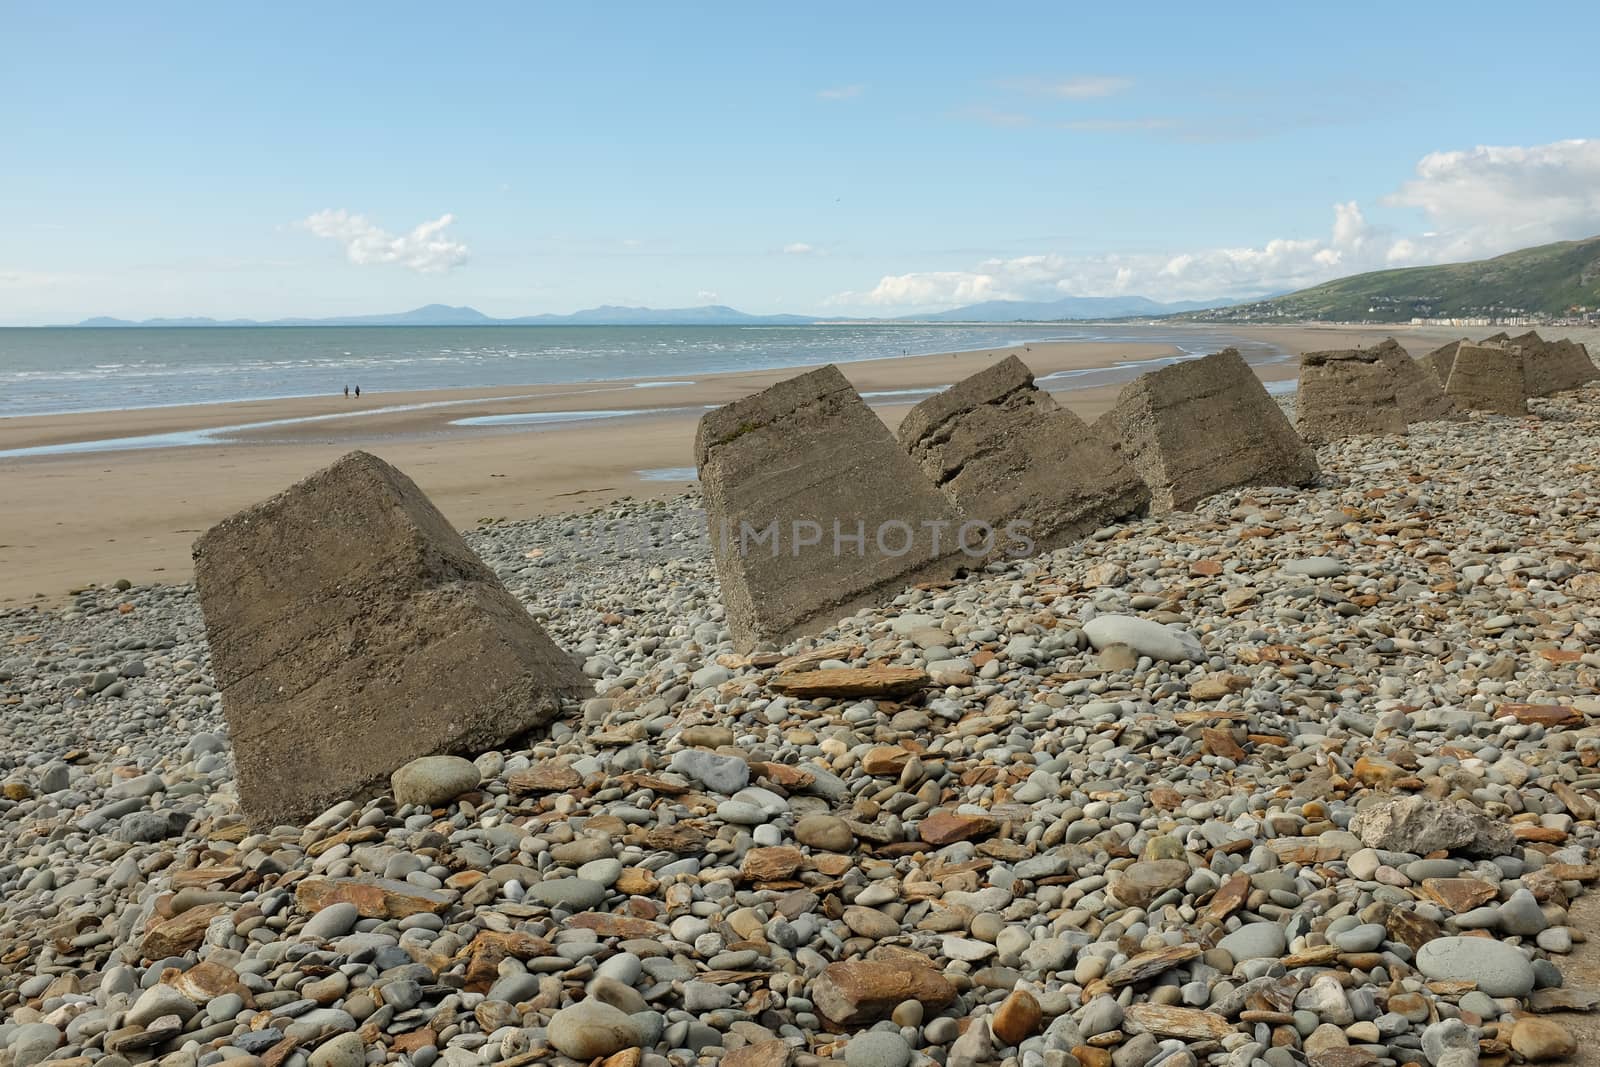 Pebbles and concrete  bollards make up the sea defences on the beautifull Fairbourne beach, Gwynedd, Wales, UK